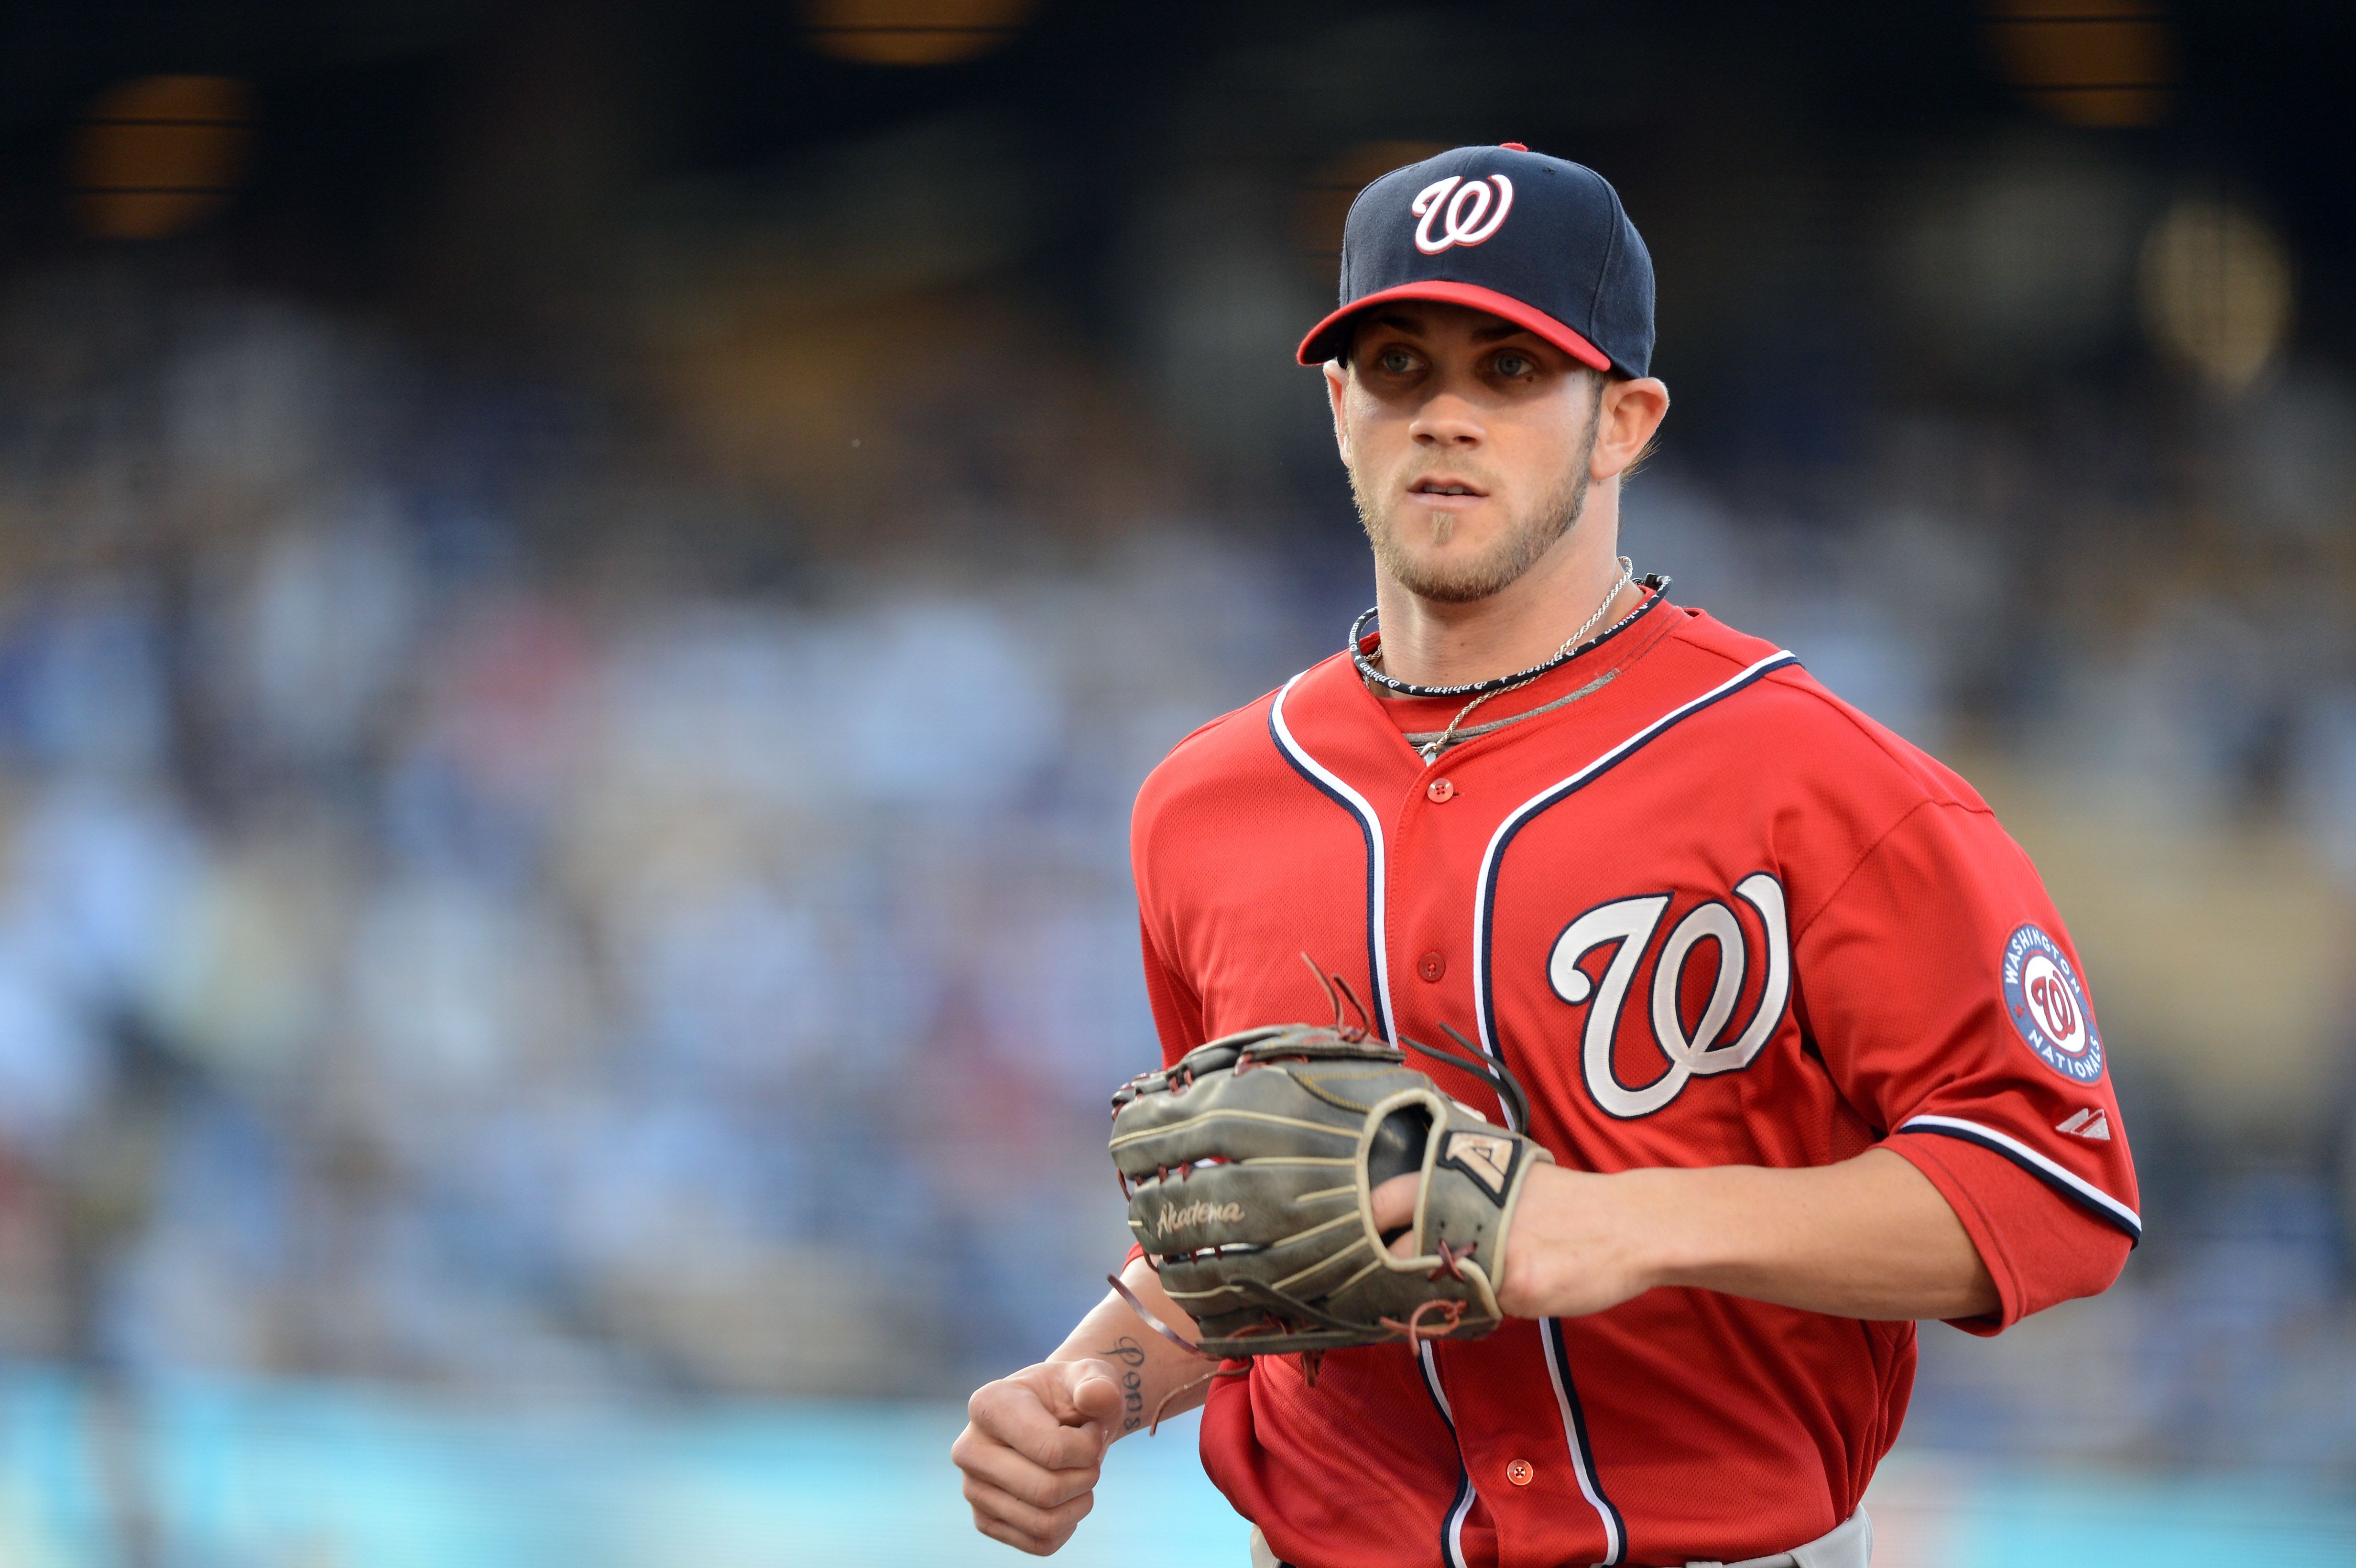 The Washington Nationals are all grown up and headed to first